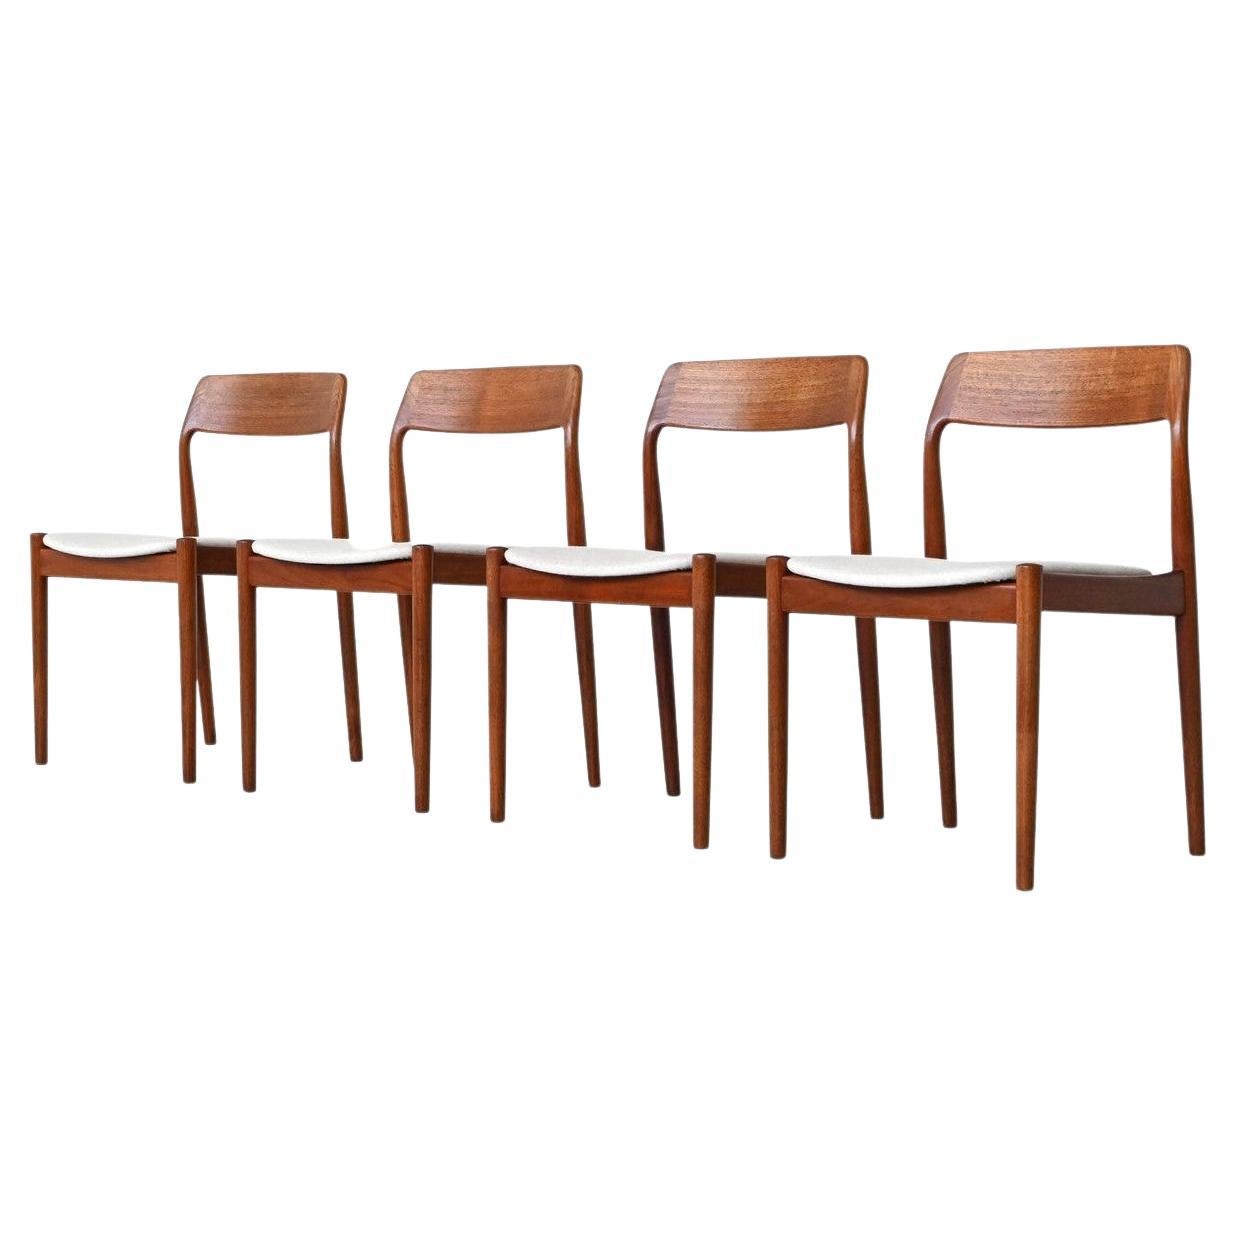 Johannes Norgaard dining chairs in teak and wool Denmark 1963